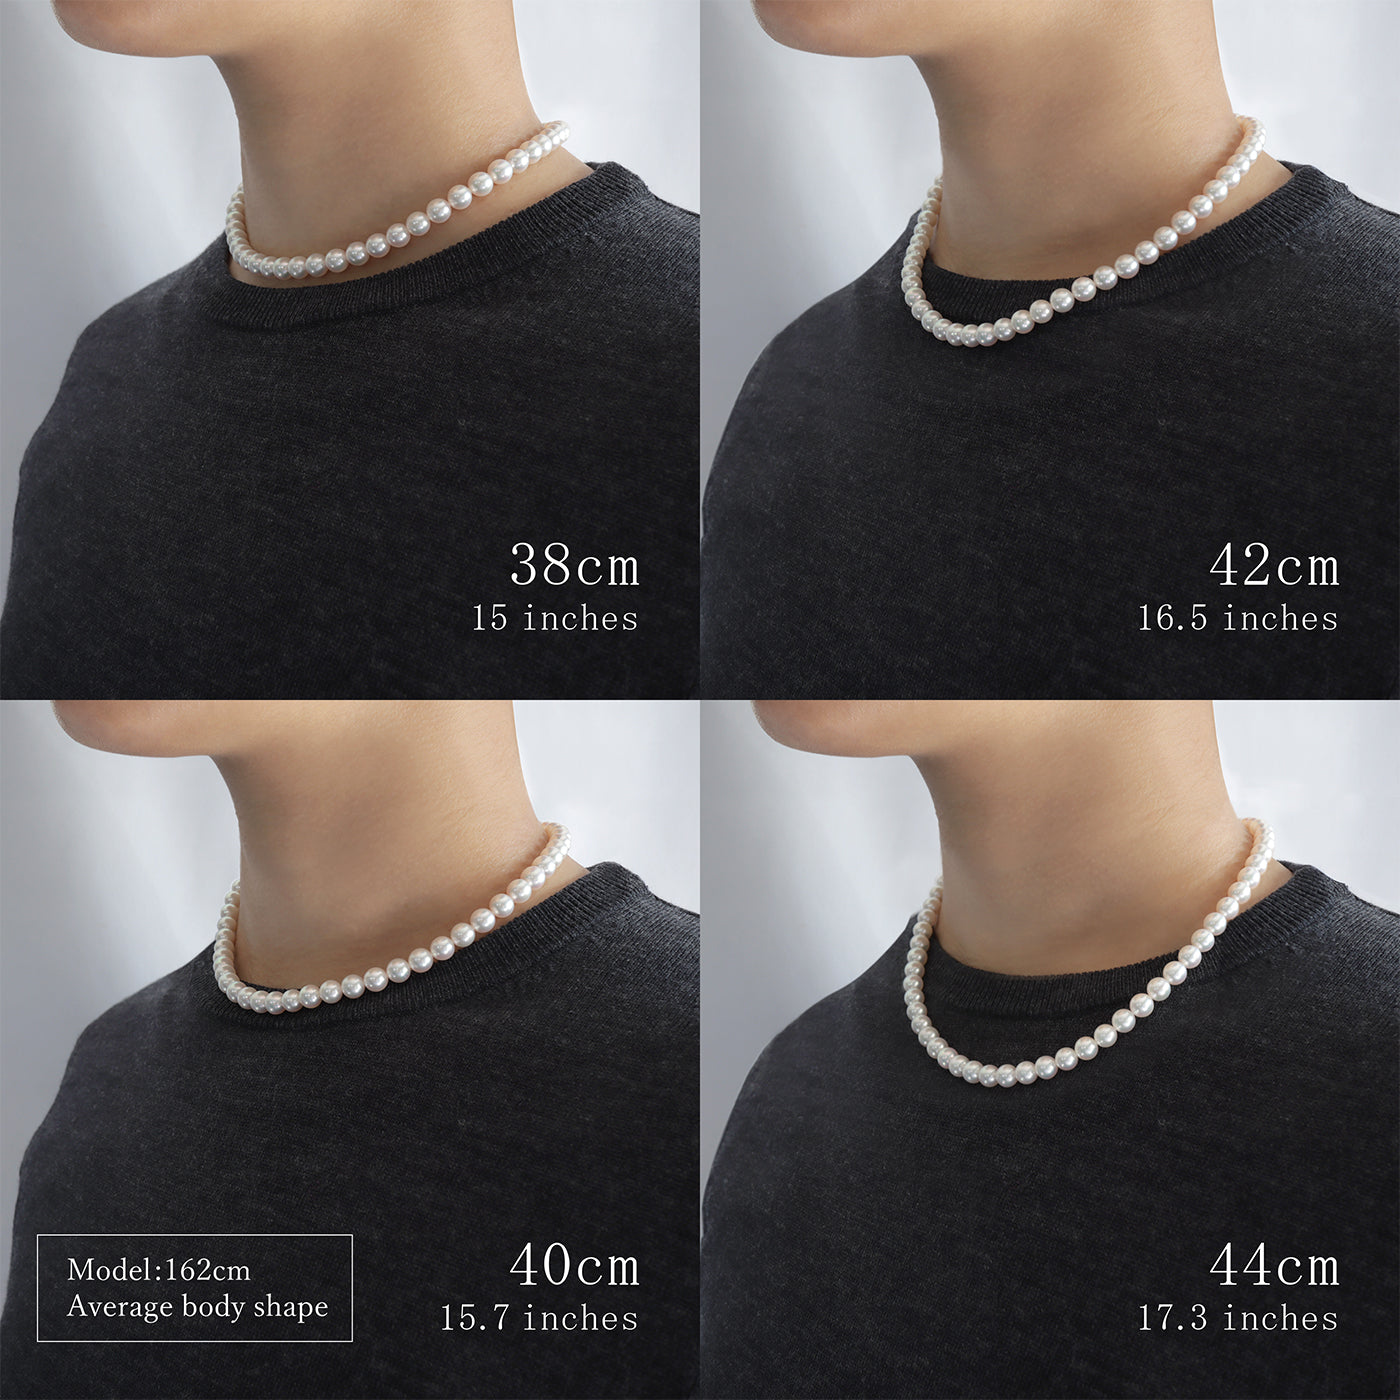 Akoya Pearl Necklace - 6.5-7.0mm ”花珠”アコヤパール